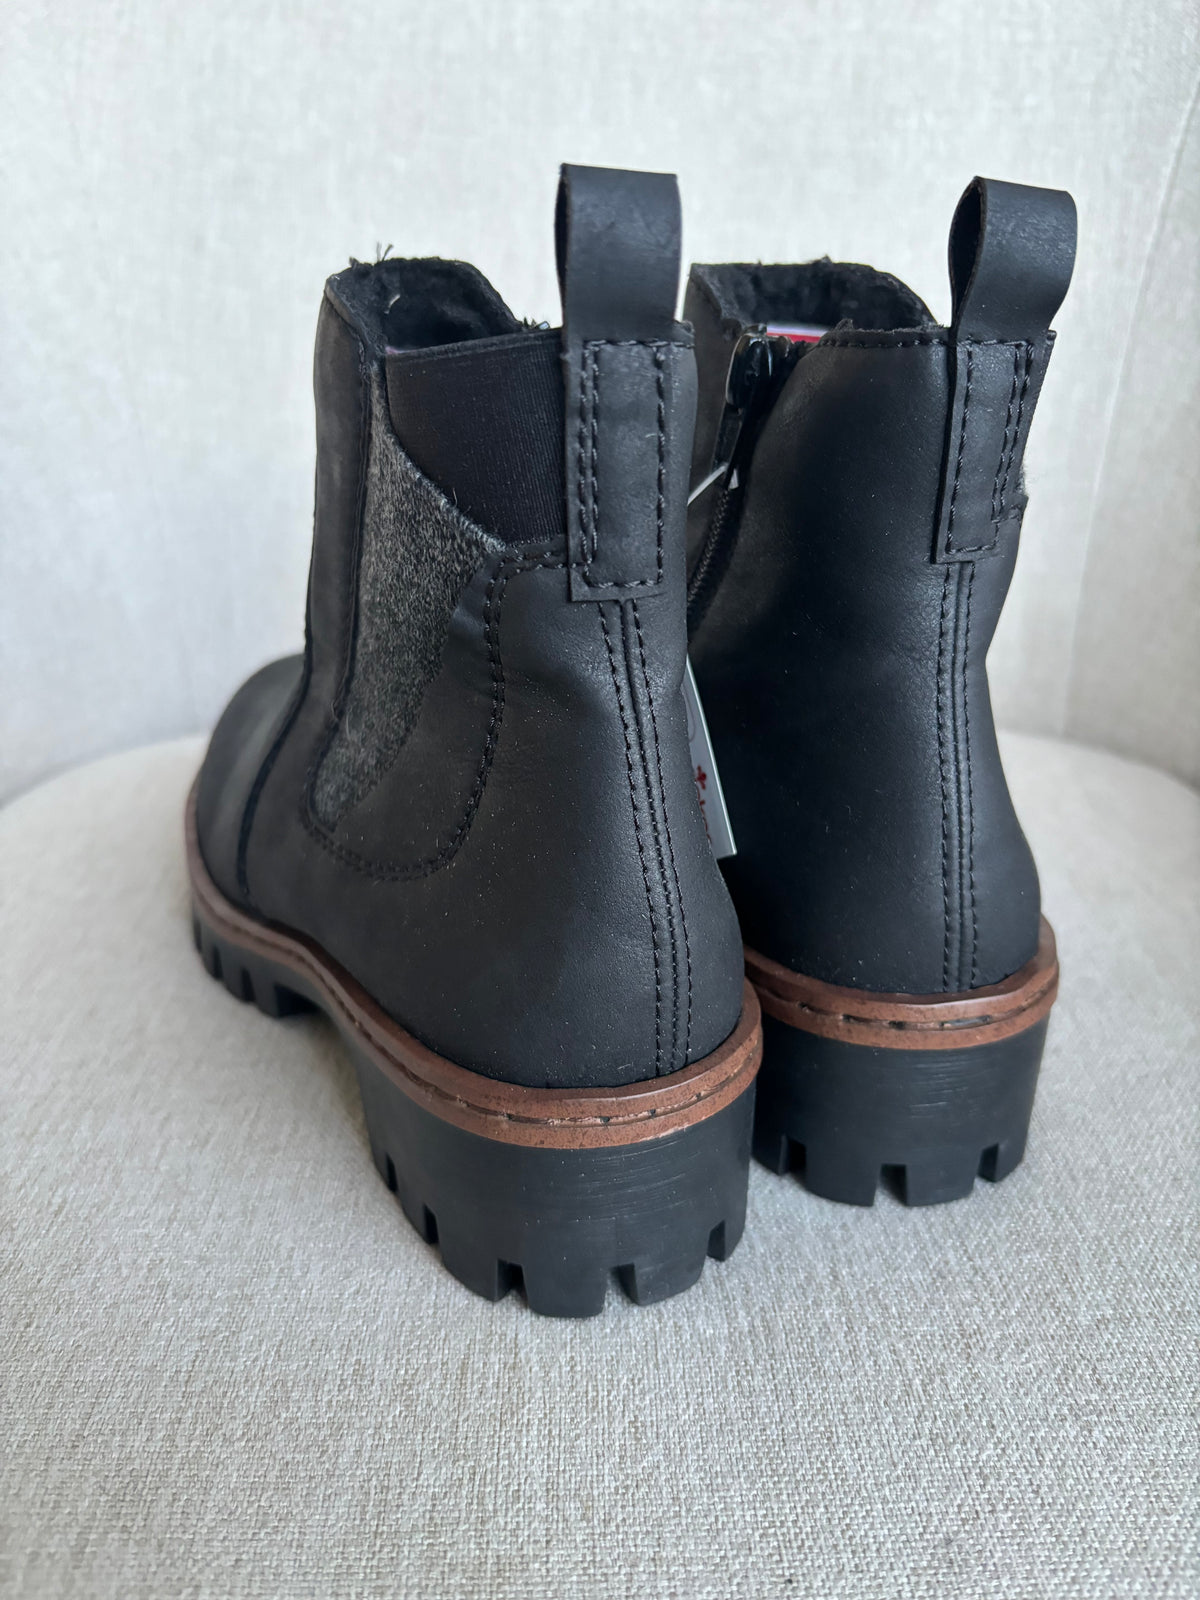 Rieker Black Ankle Boots Size 3.5 Winter Boots